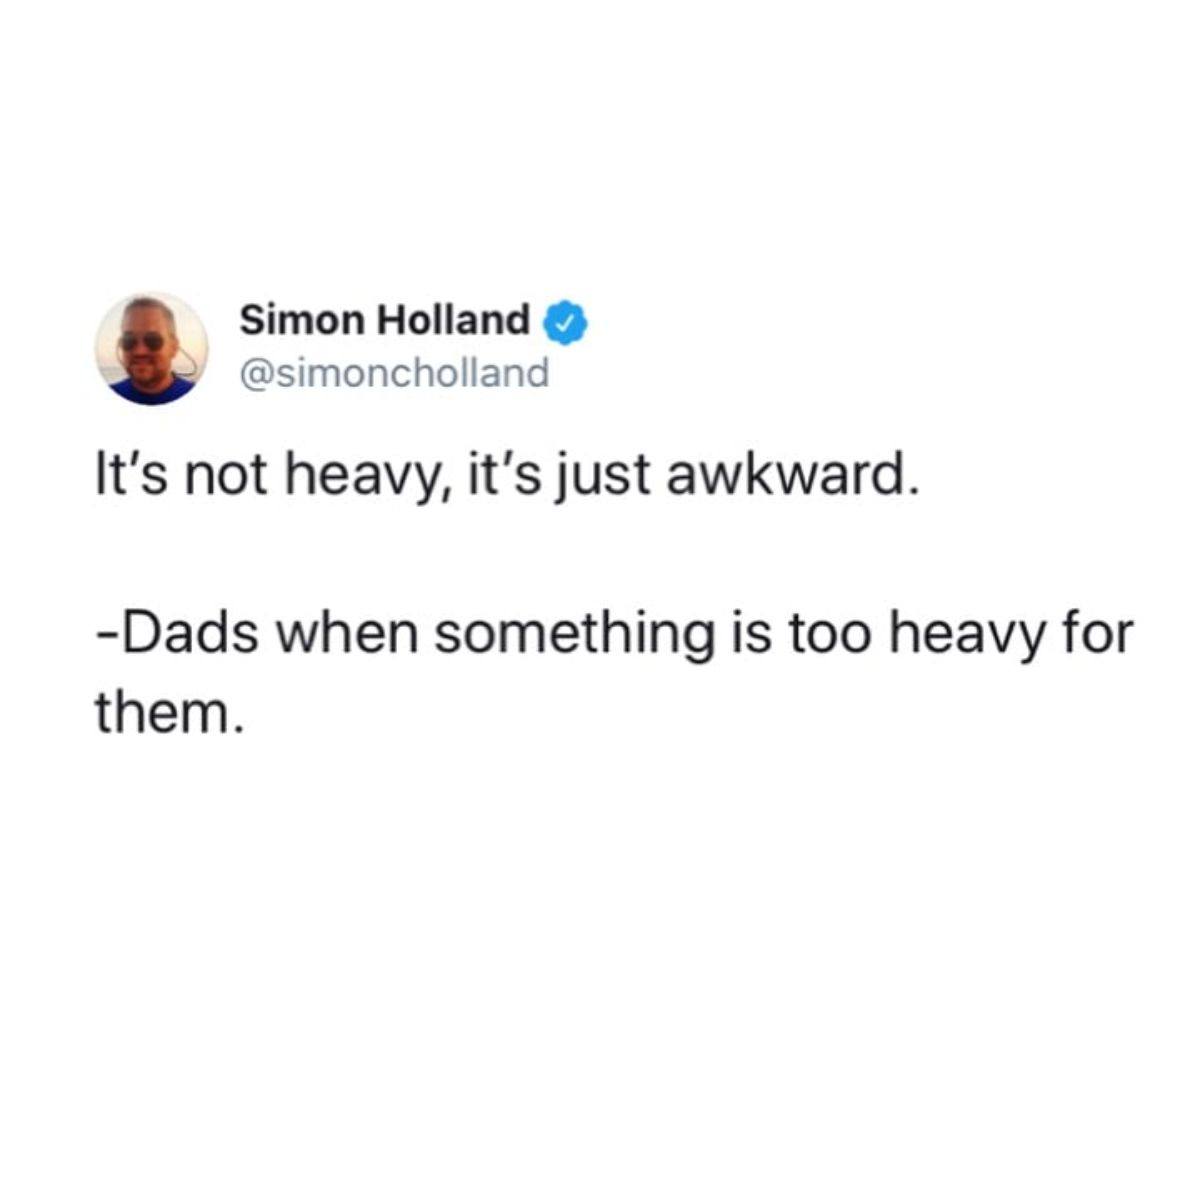 insect - Simon Holland It's not heavy, it's just awkward. Dads when something is too heavy for them.